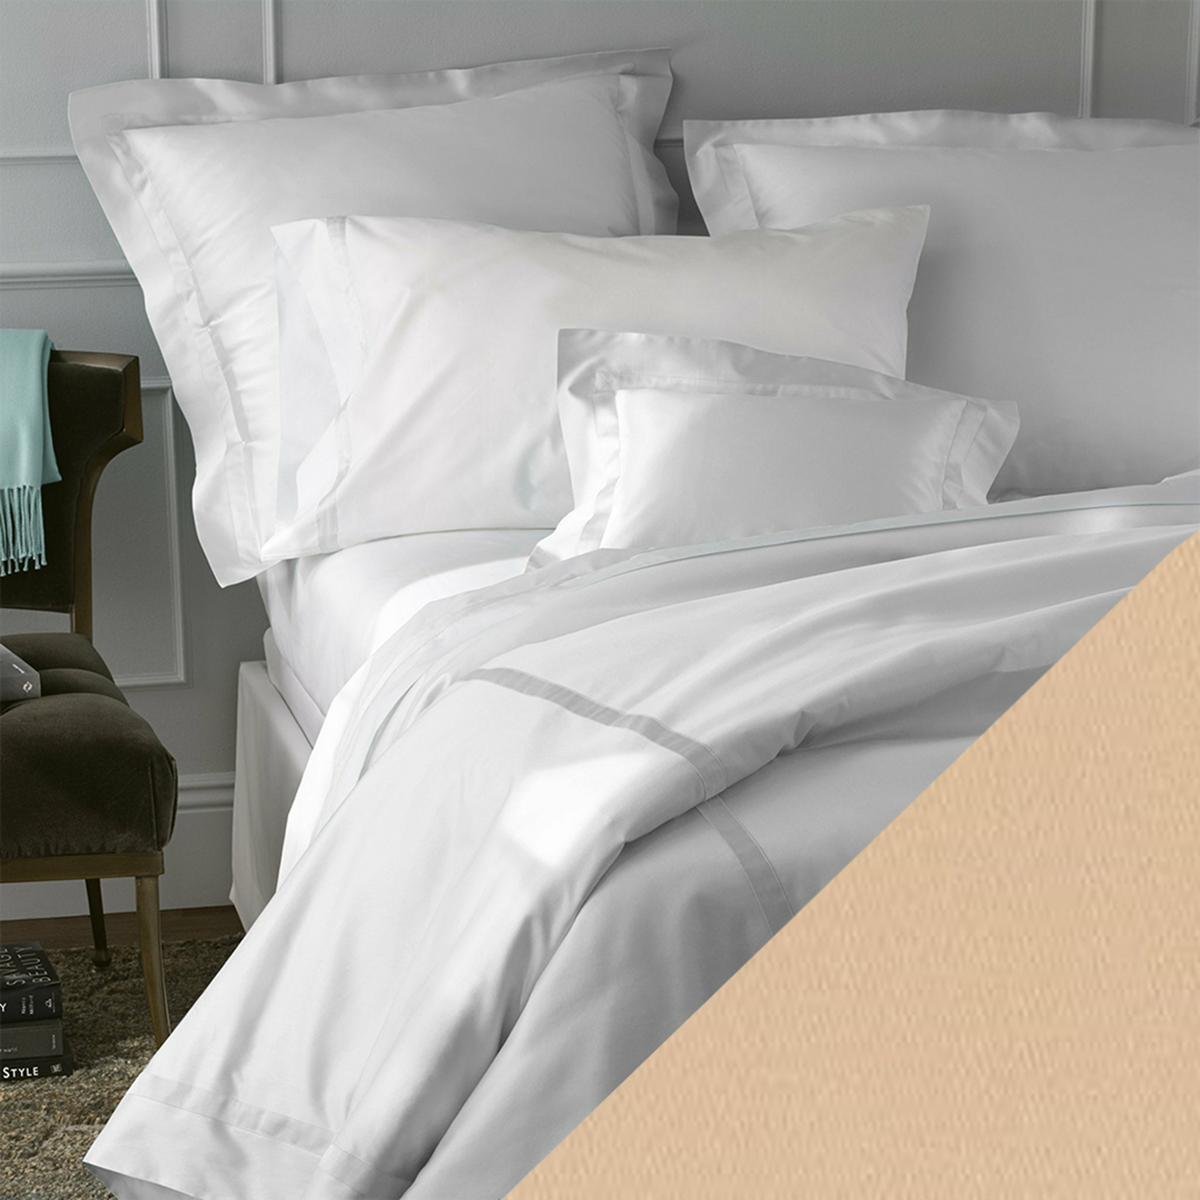 Matouk Nocturne Bedding Collection with Swatch in Ambrosia Color